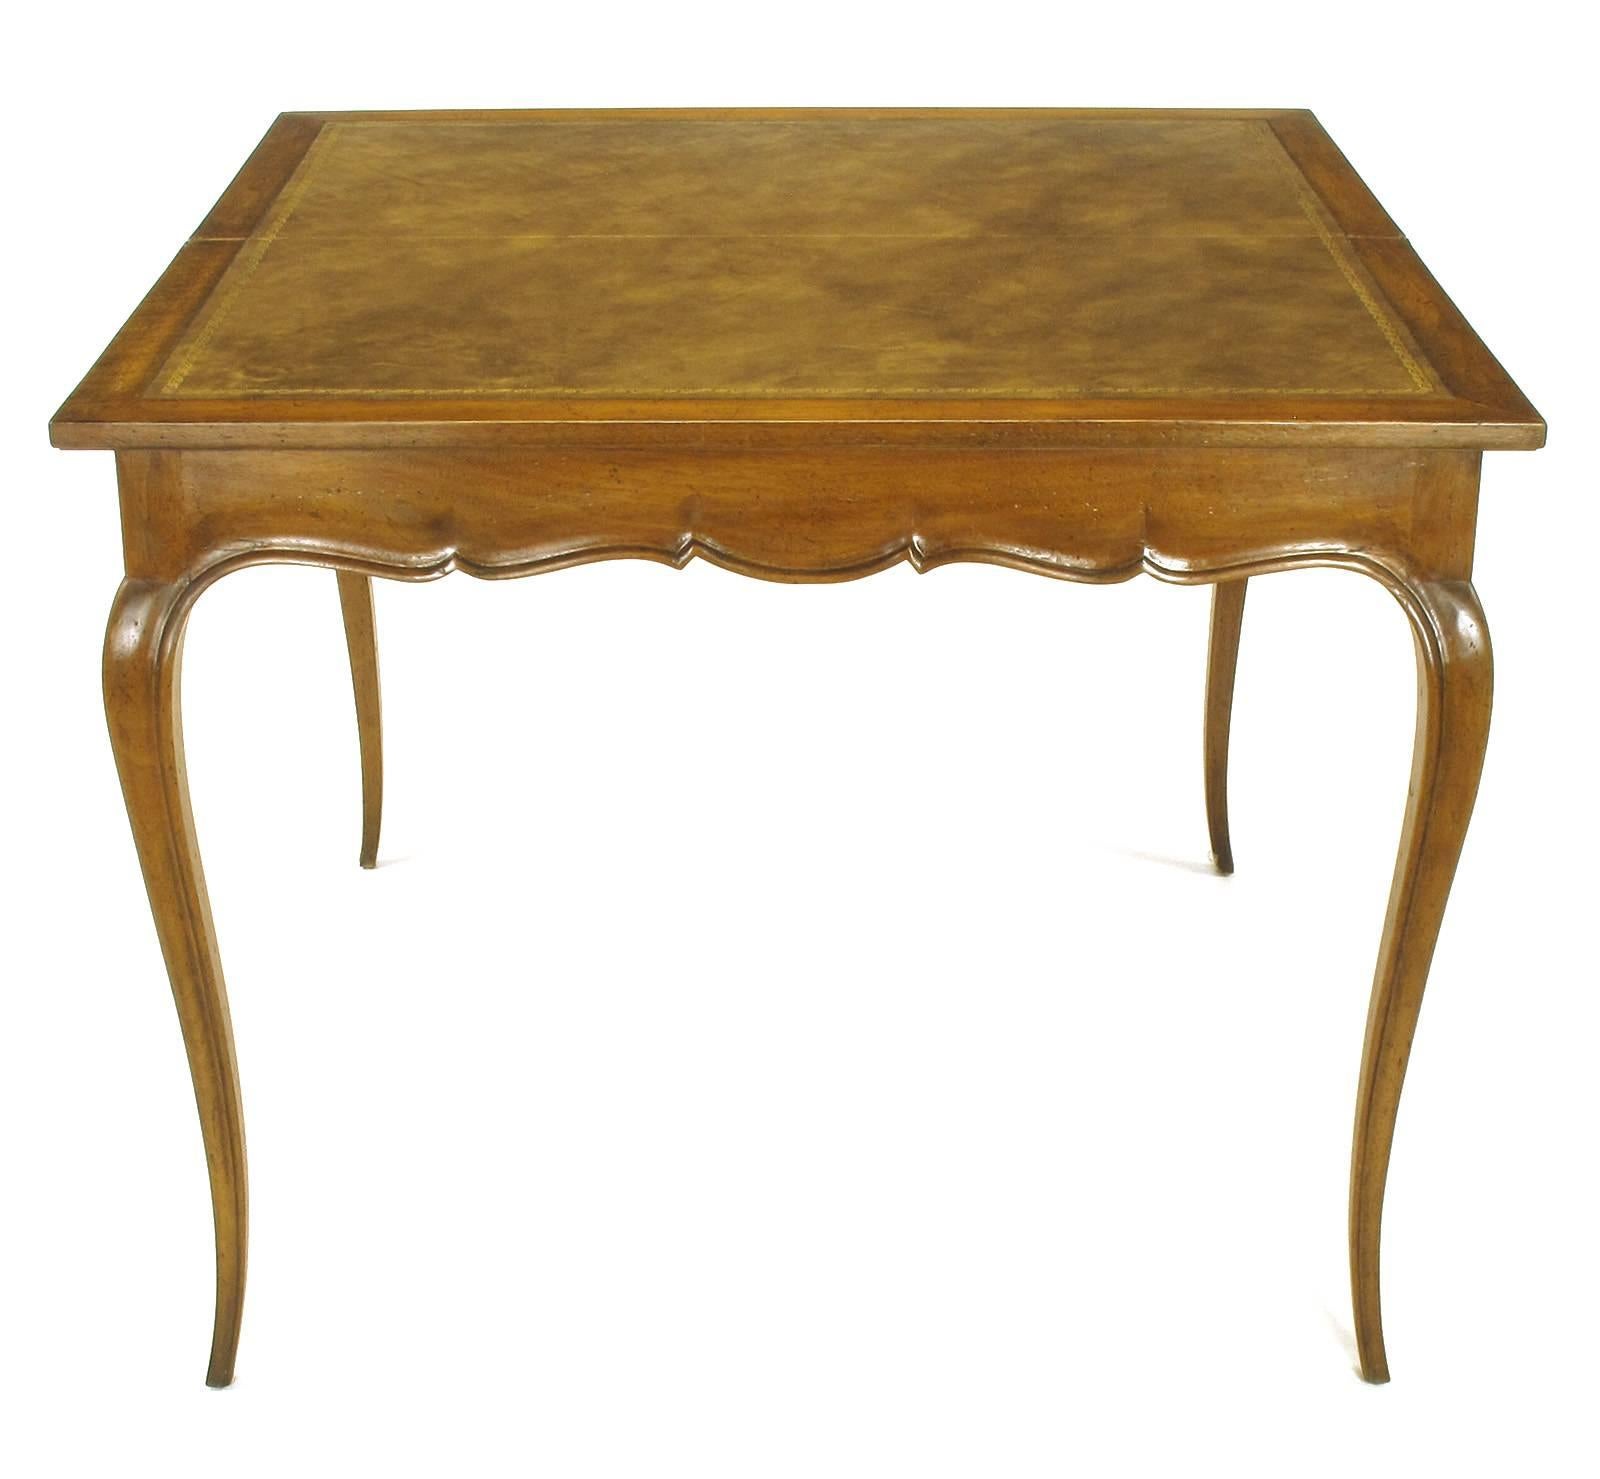 French cabriole leg flip-top games console table. Carved fruitwood with scalloped apron and finely tapered legs, brass hinges and sliding wood underside bracket for support when opened. Games table top is tooled and gold leafed leather. Aged finish